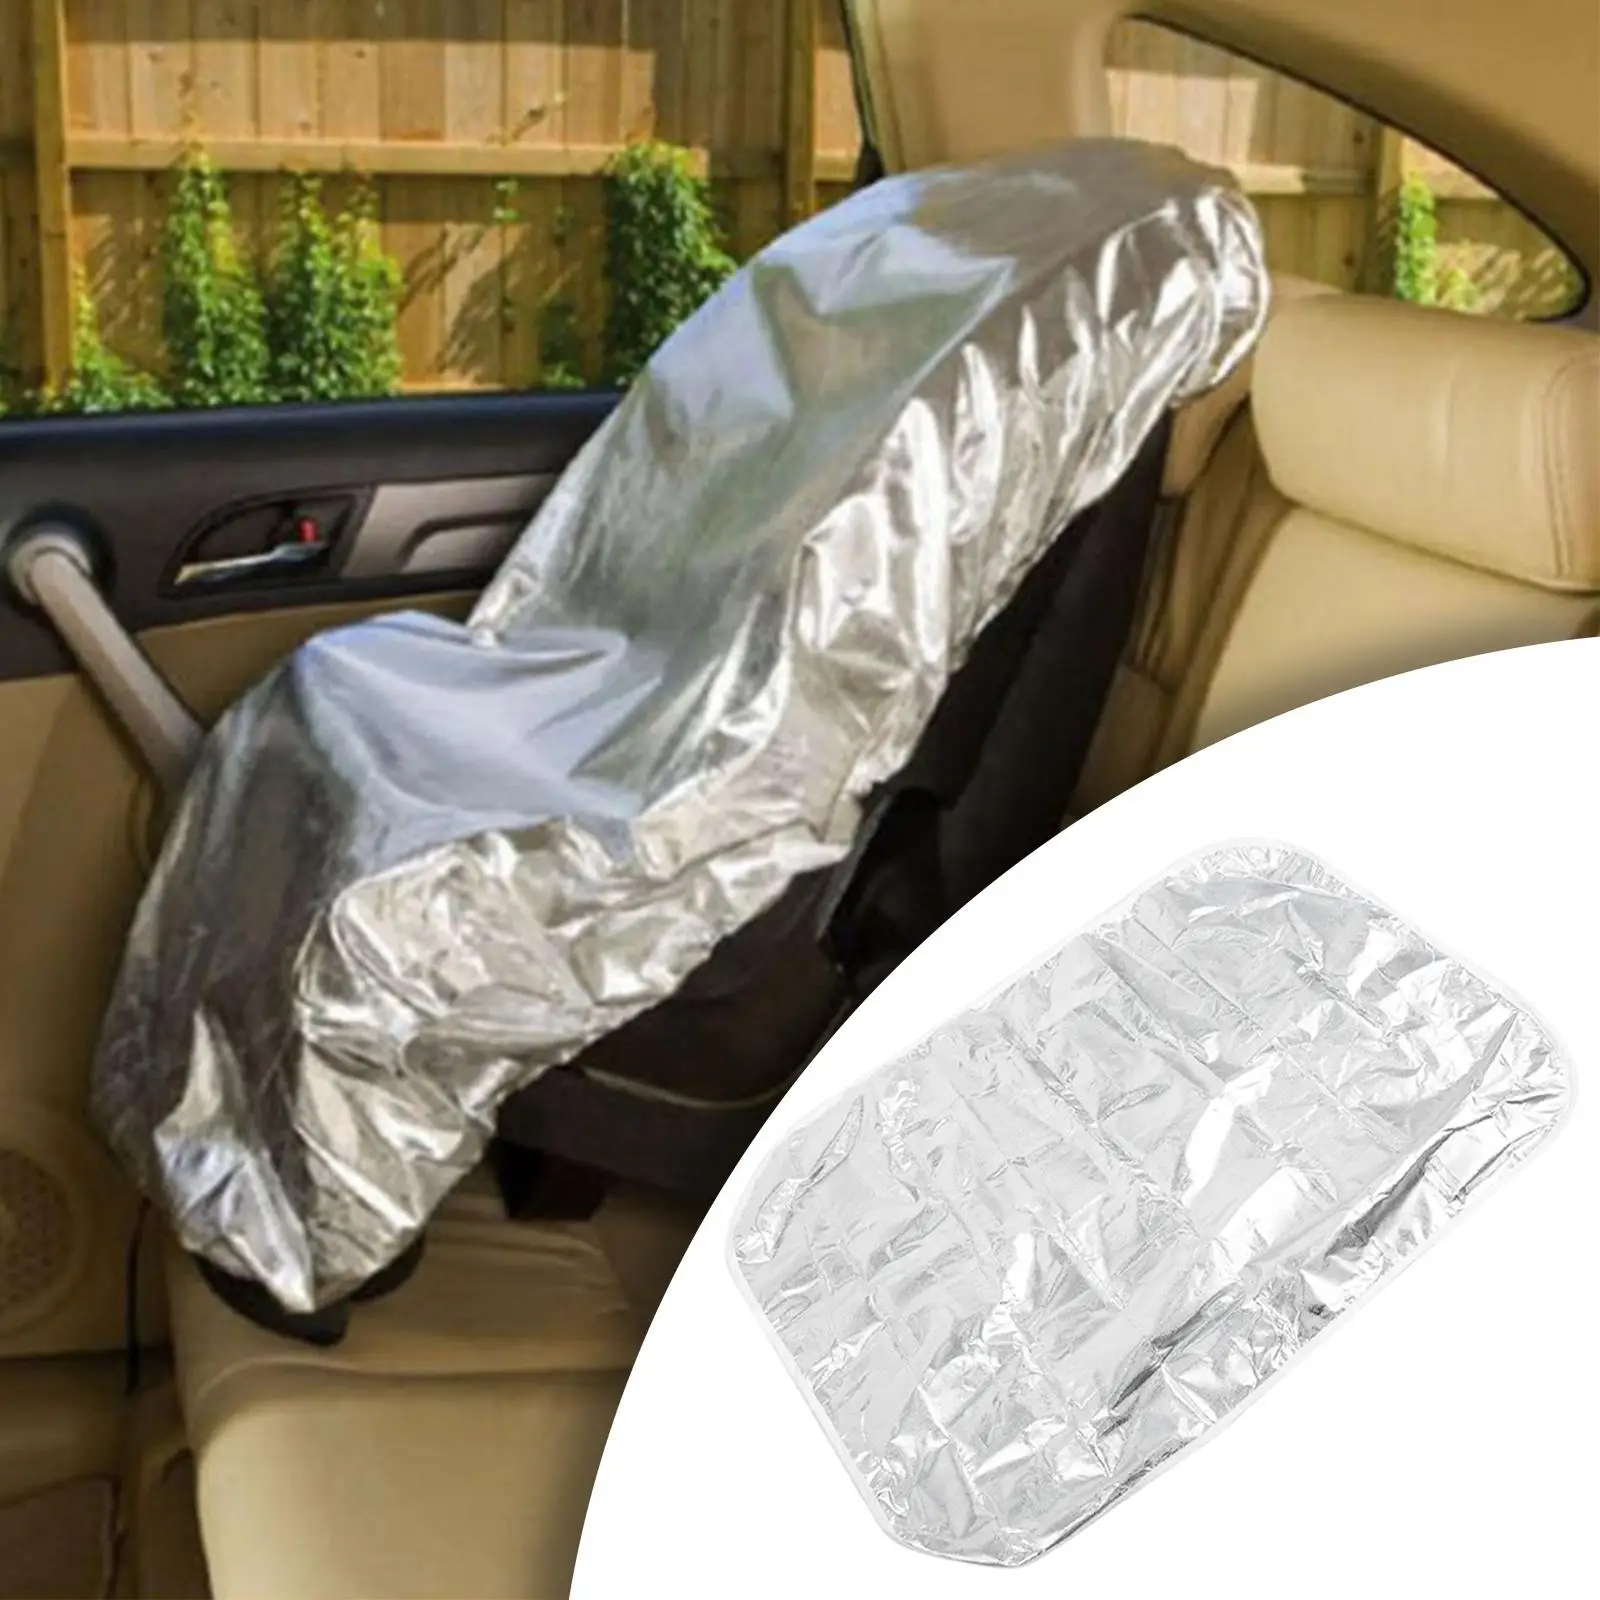  Seat  Cover, Dustproof Adjustable    Covers    Daily Use Kids